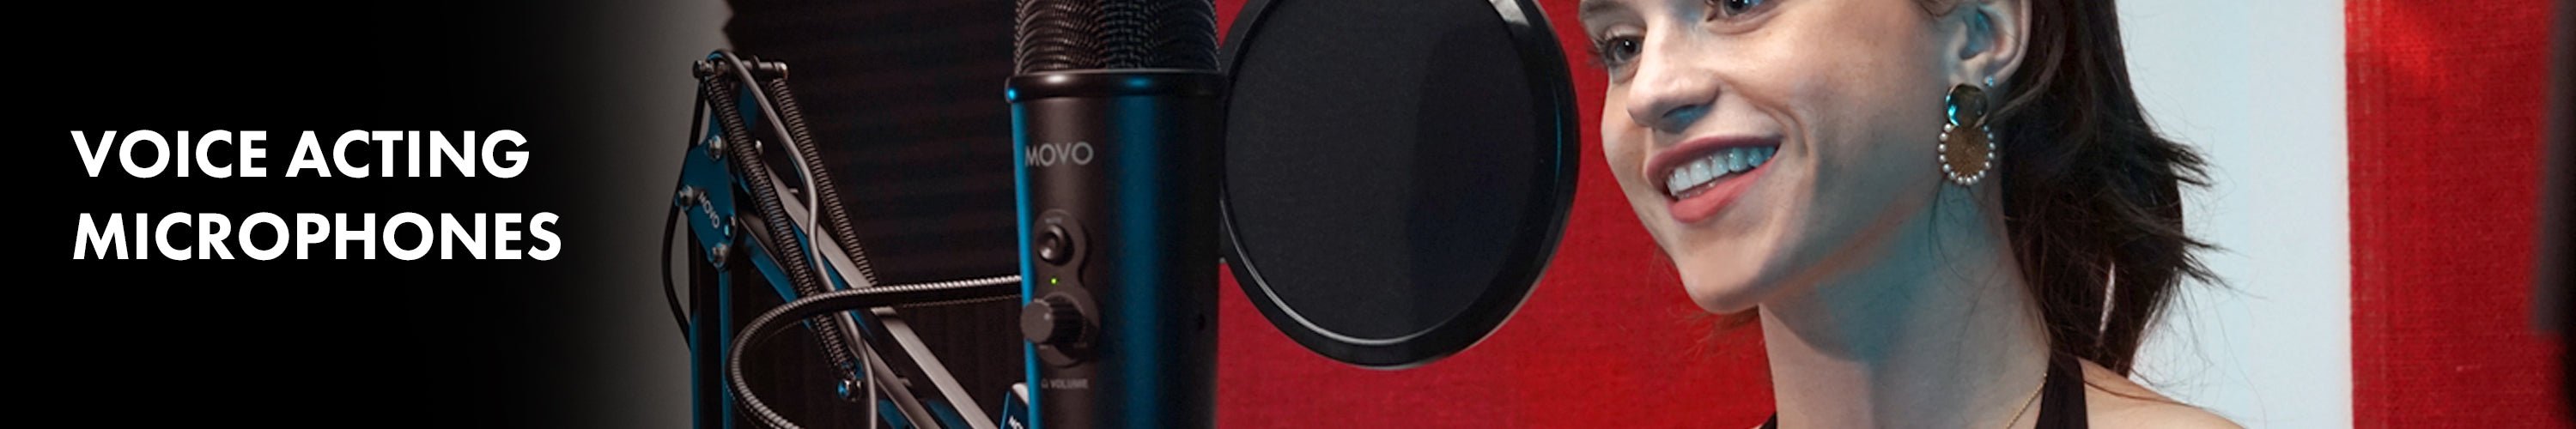 Voice Acting Microphones - Movo